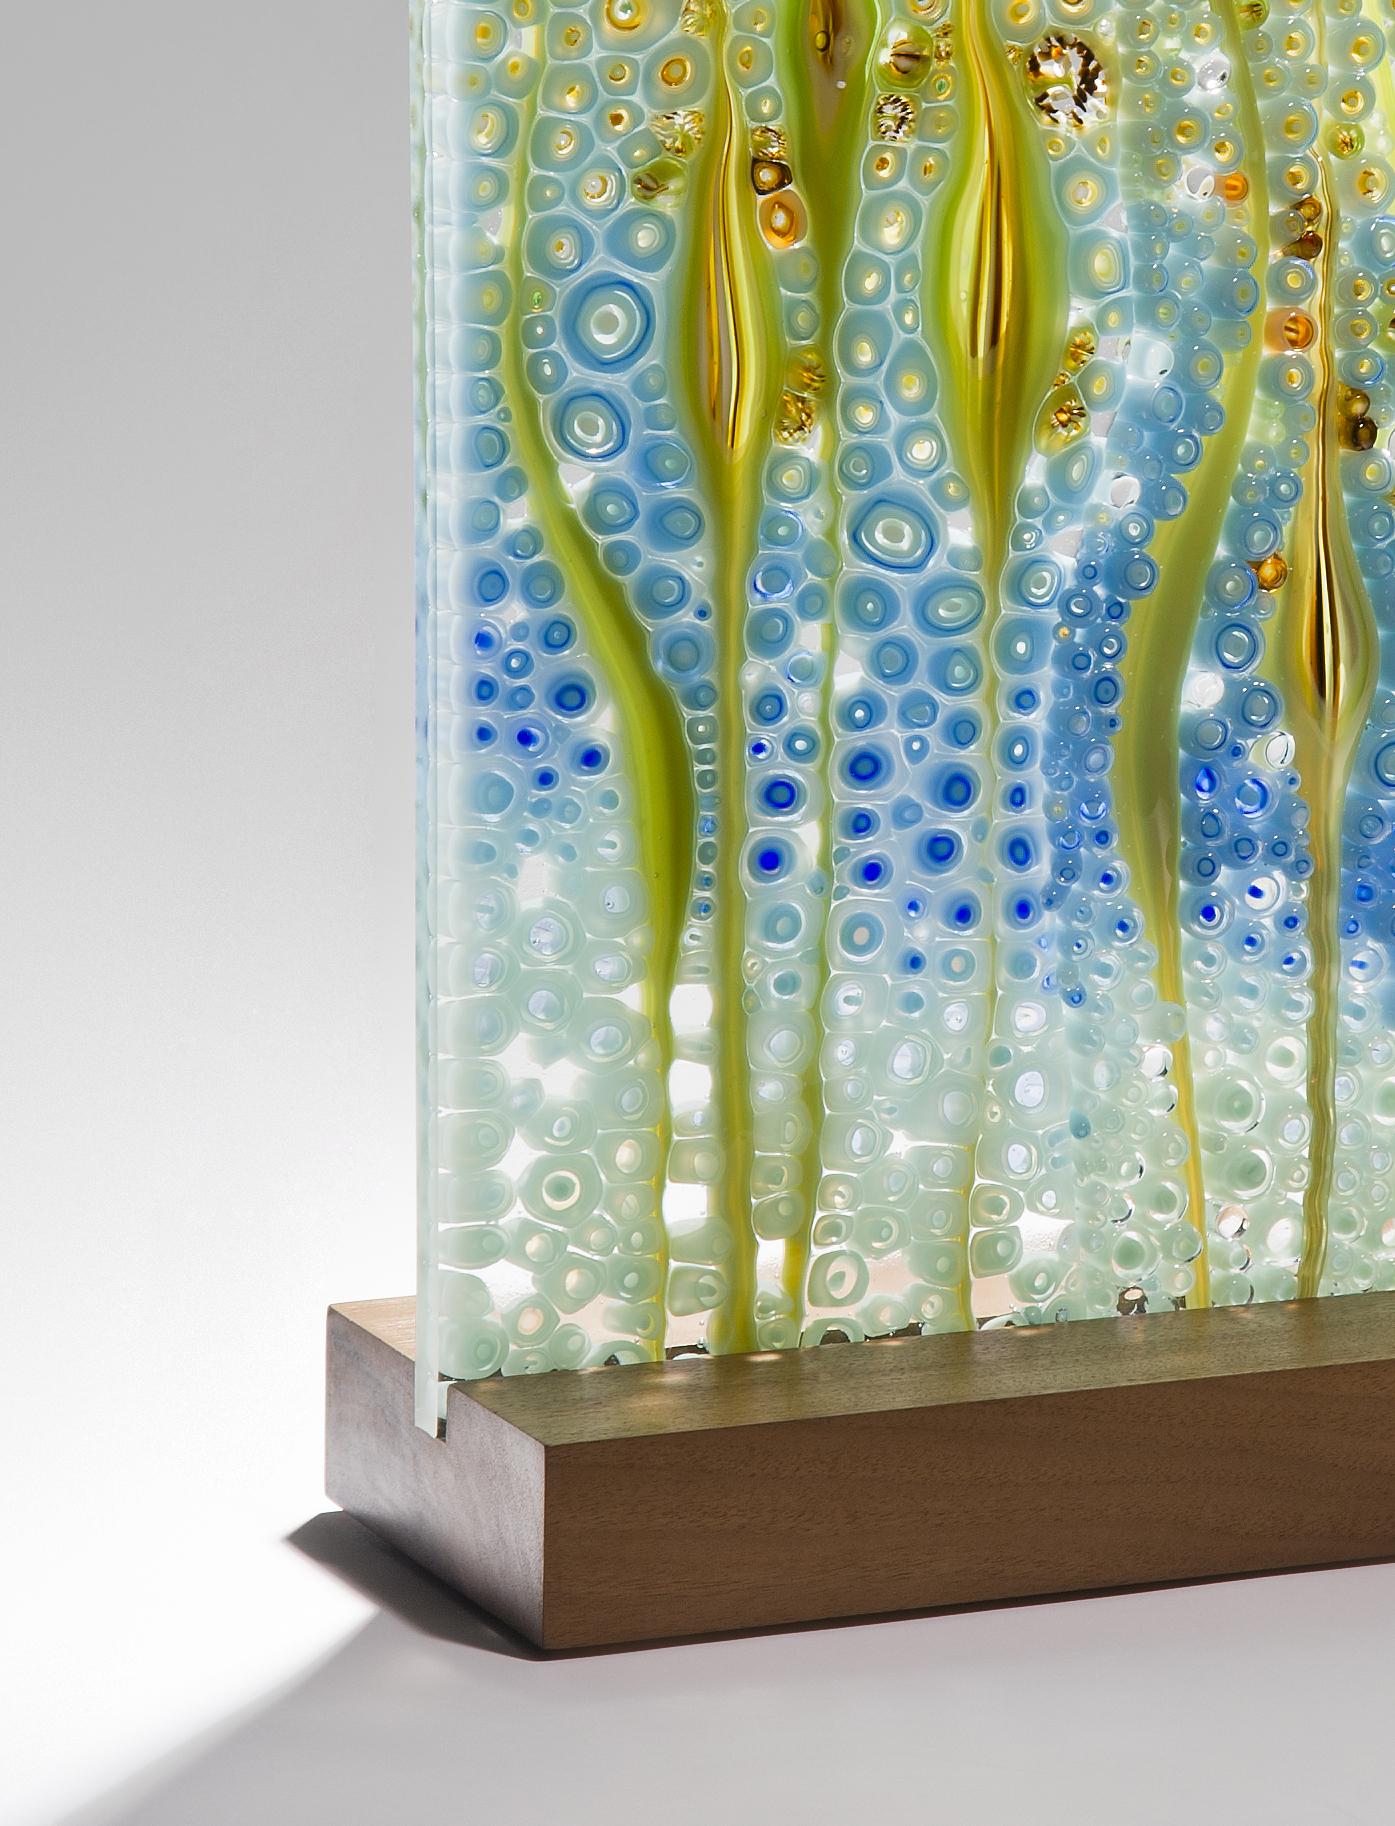 Hand-Crafted Takamaka Coconut Beach, a Unique Green & Blue Glass Sculpture by Sandra A. Fuchs